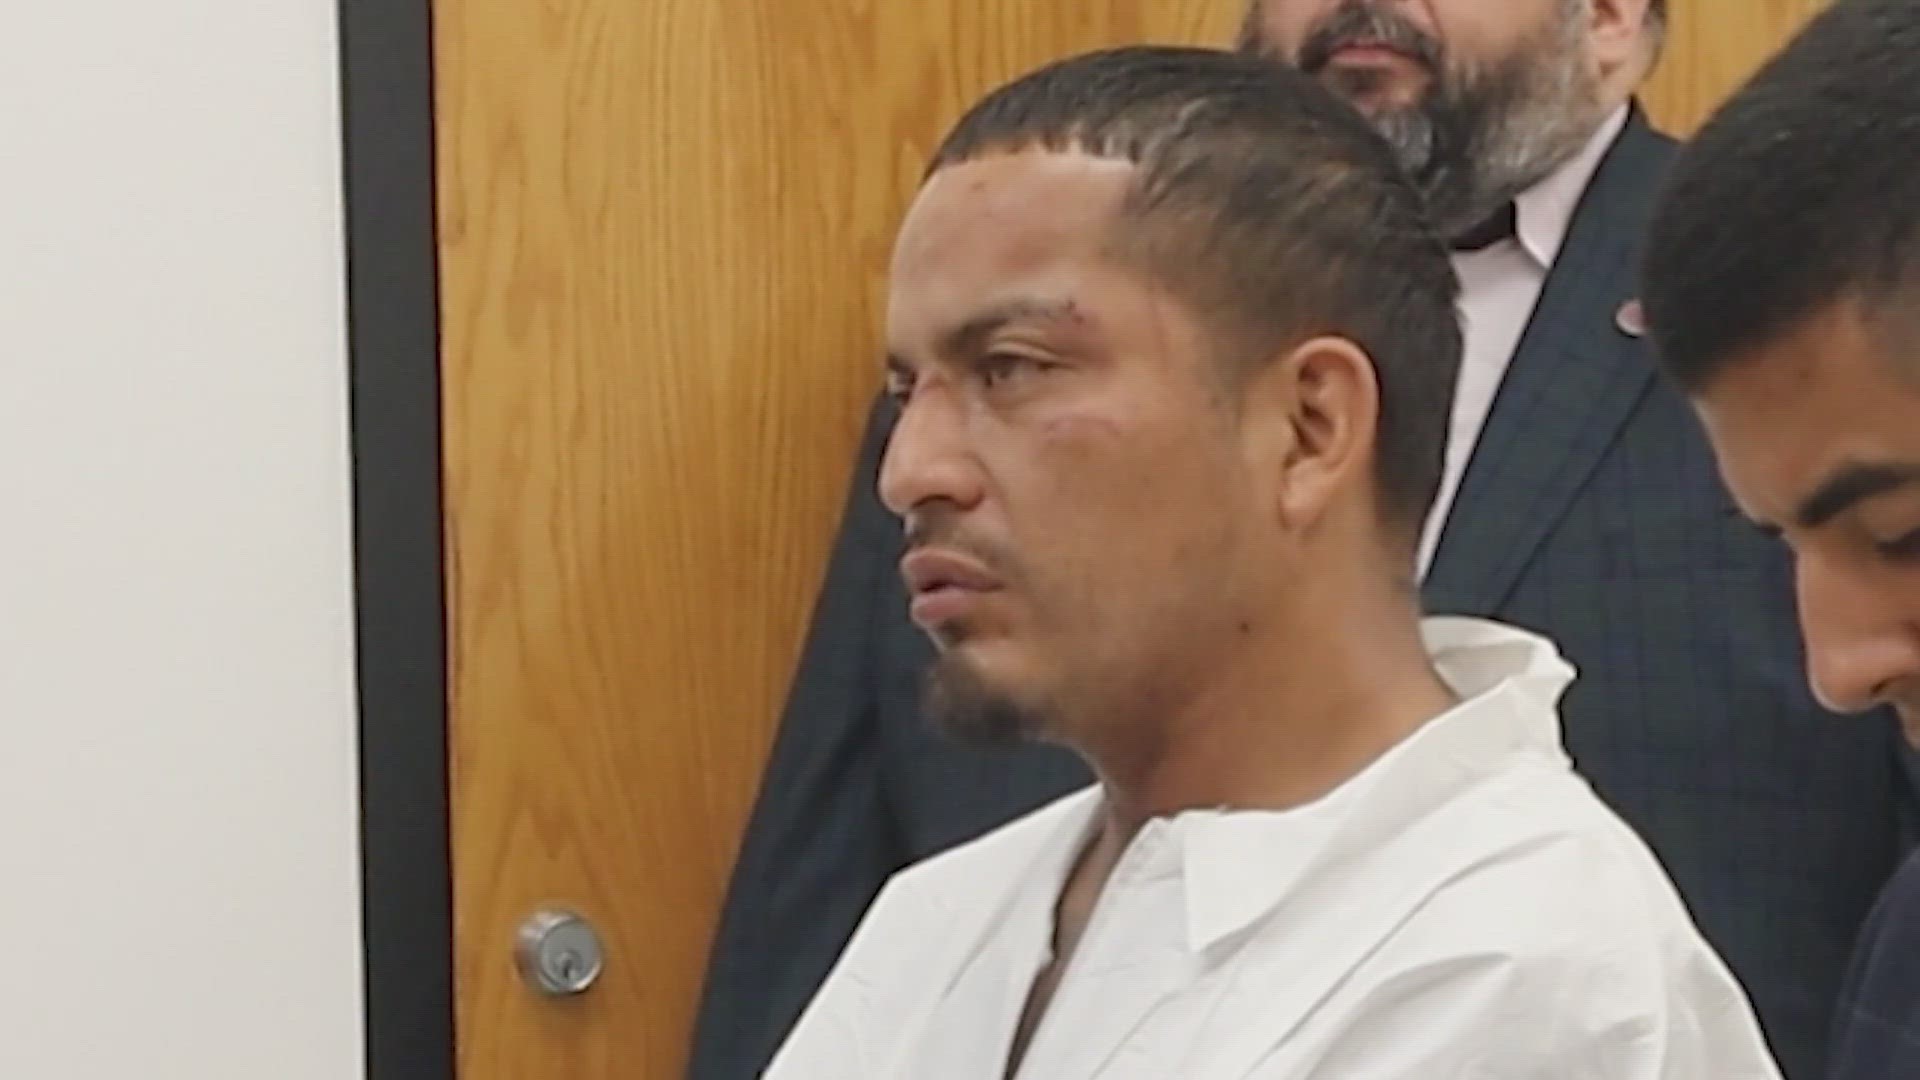 George Alvarez has been charged with eight counts of manslaughter and 10 counts of aggravated assault with a deadly weapon, according to authorities.